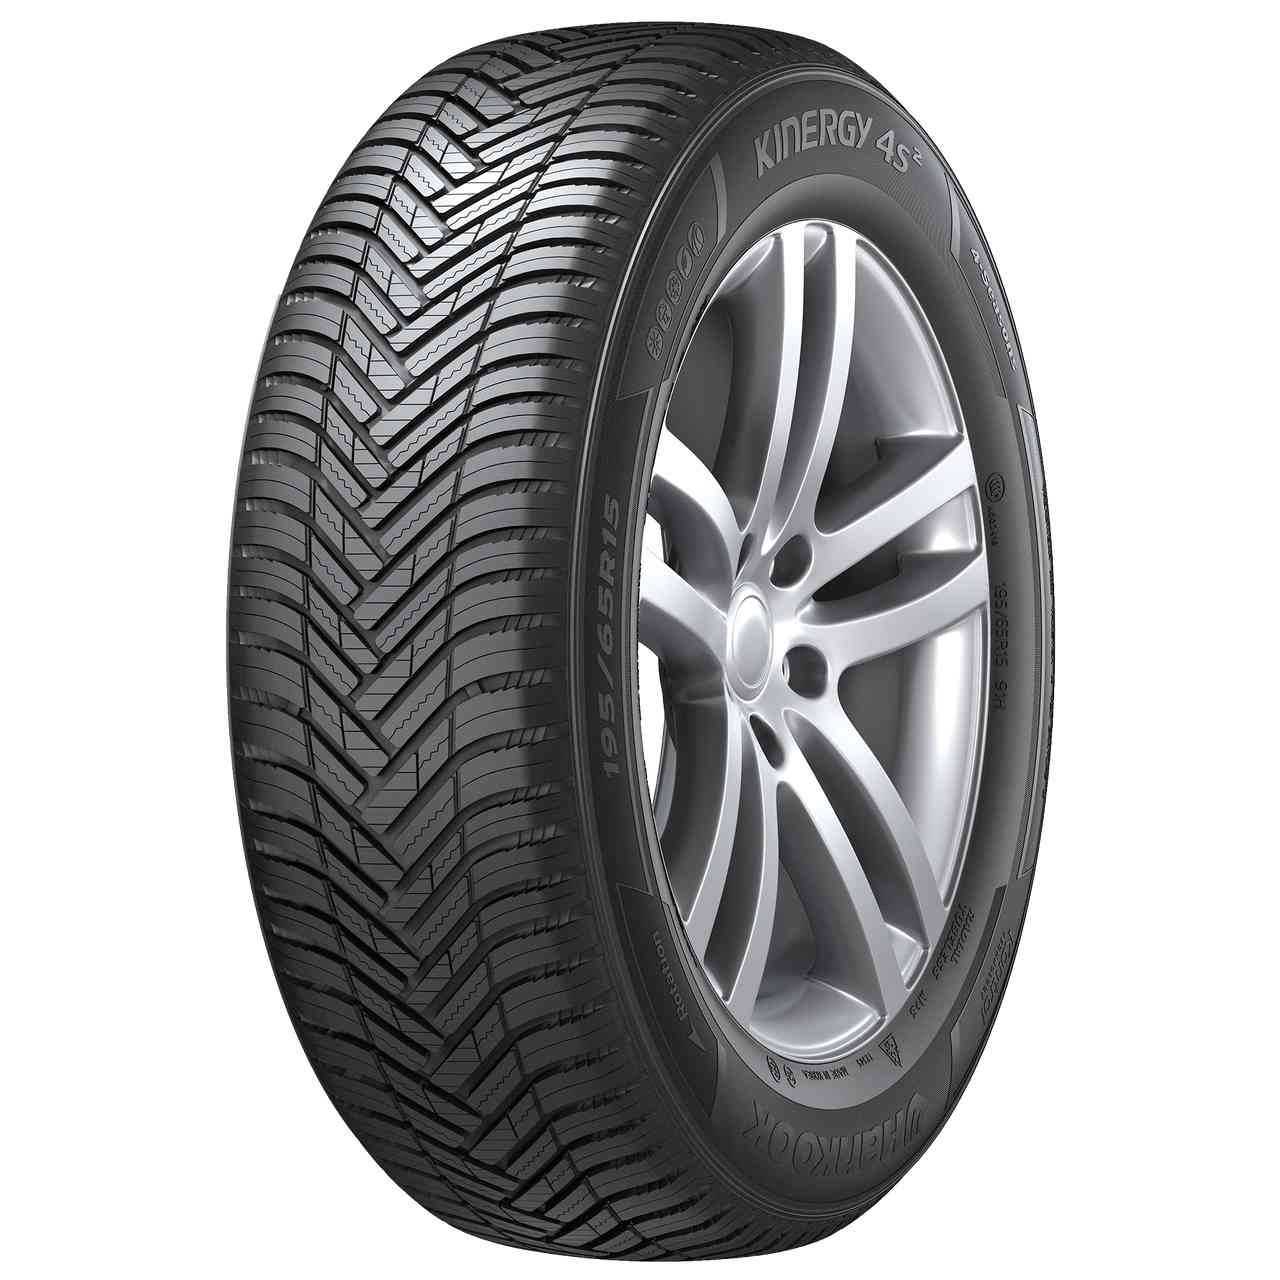 HANKOOK KINERGY 4S 2 (H750) 195/55R15 85V BSW